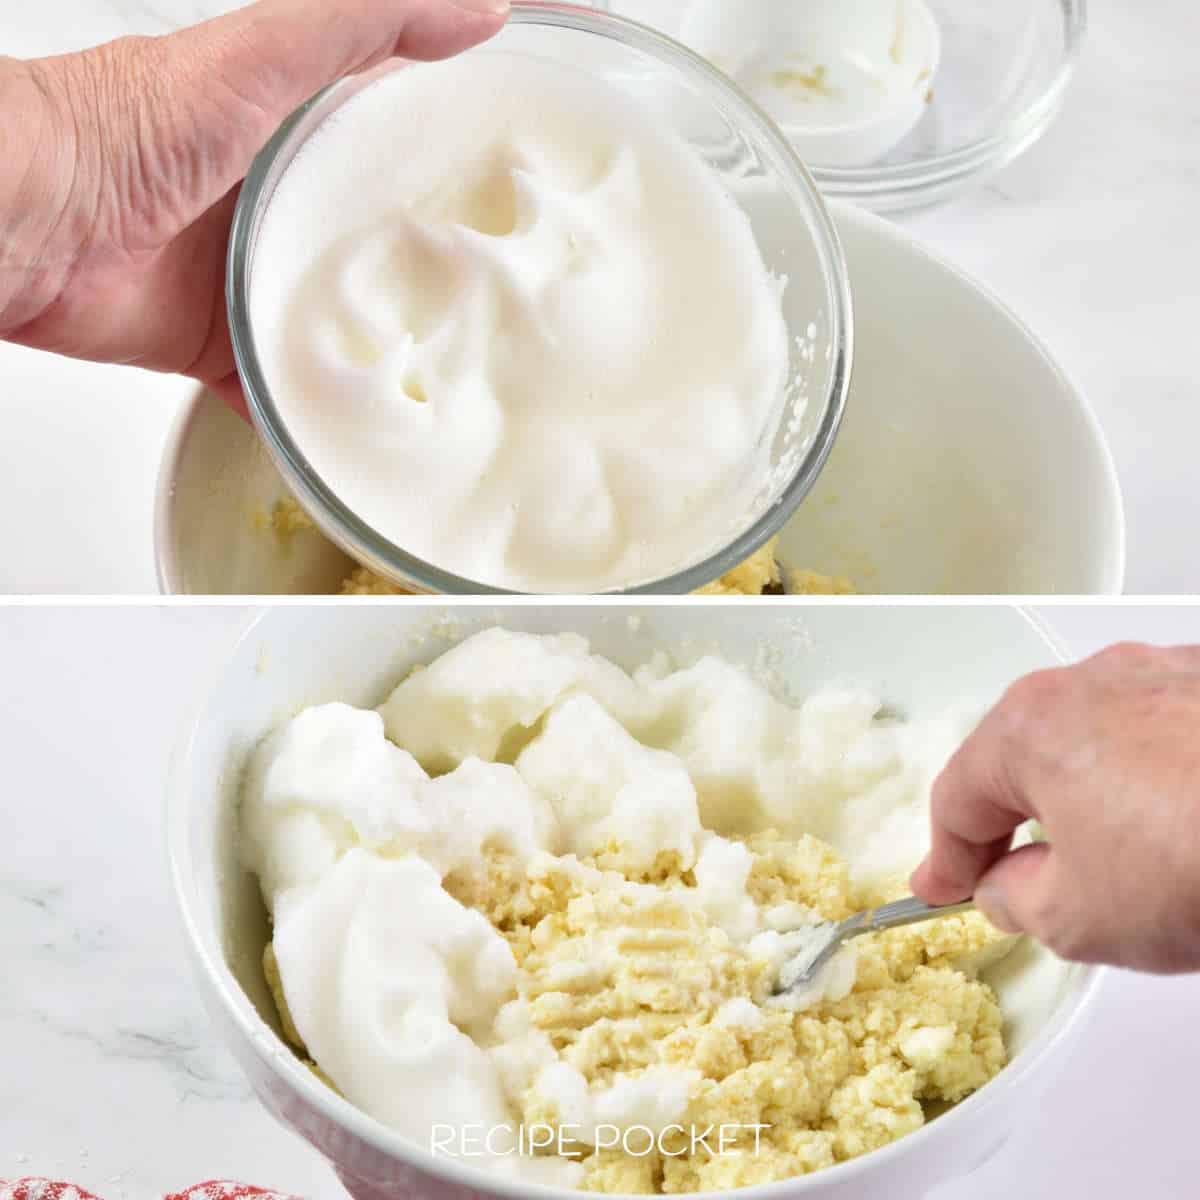 Egg white being mixed into ricotta mixture.